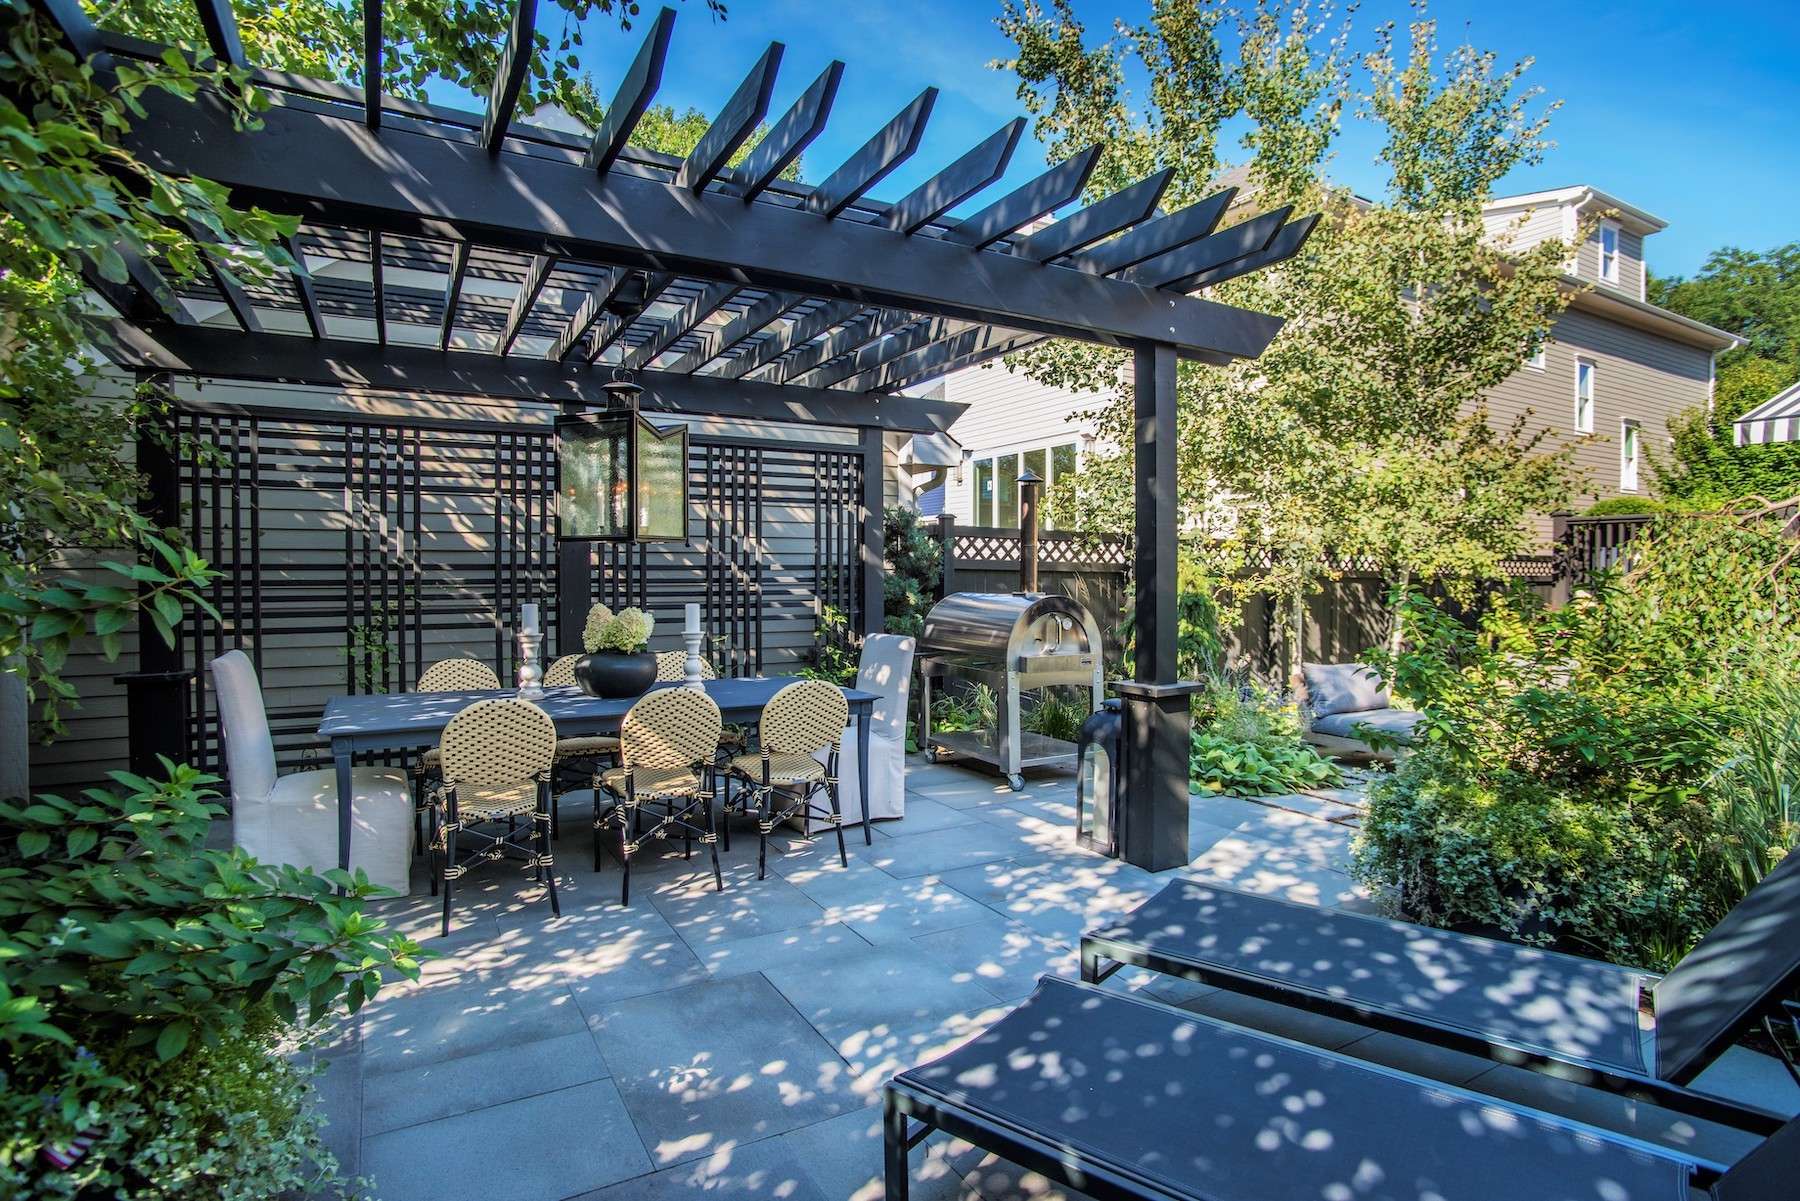 Pergola and outdoor dining area